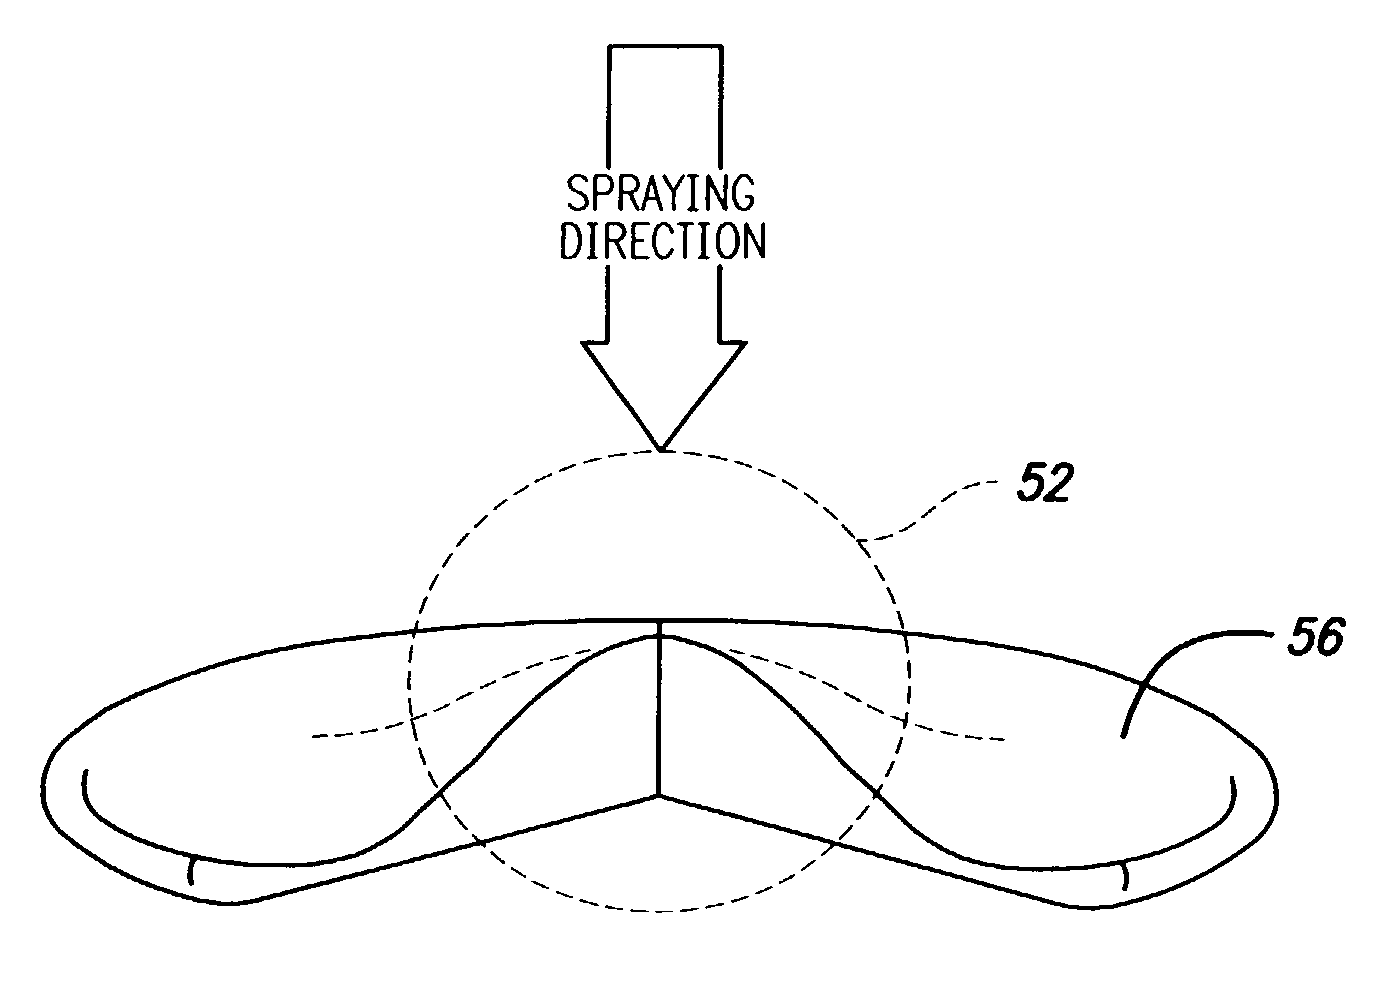 Spray processing of porous medical devices